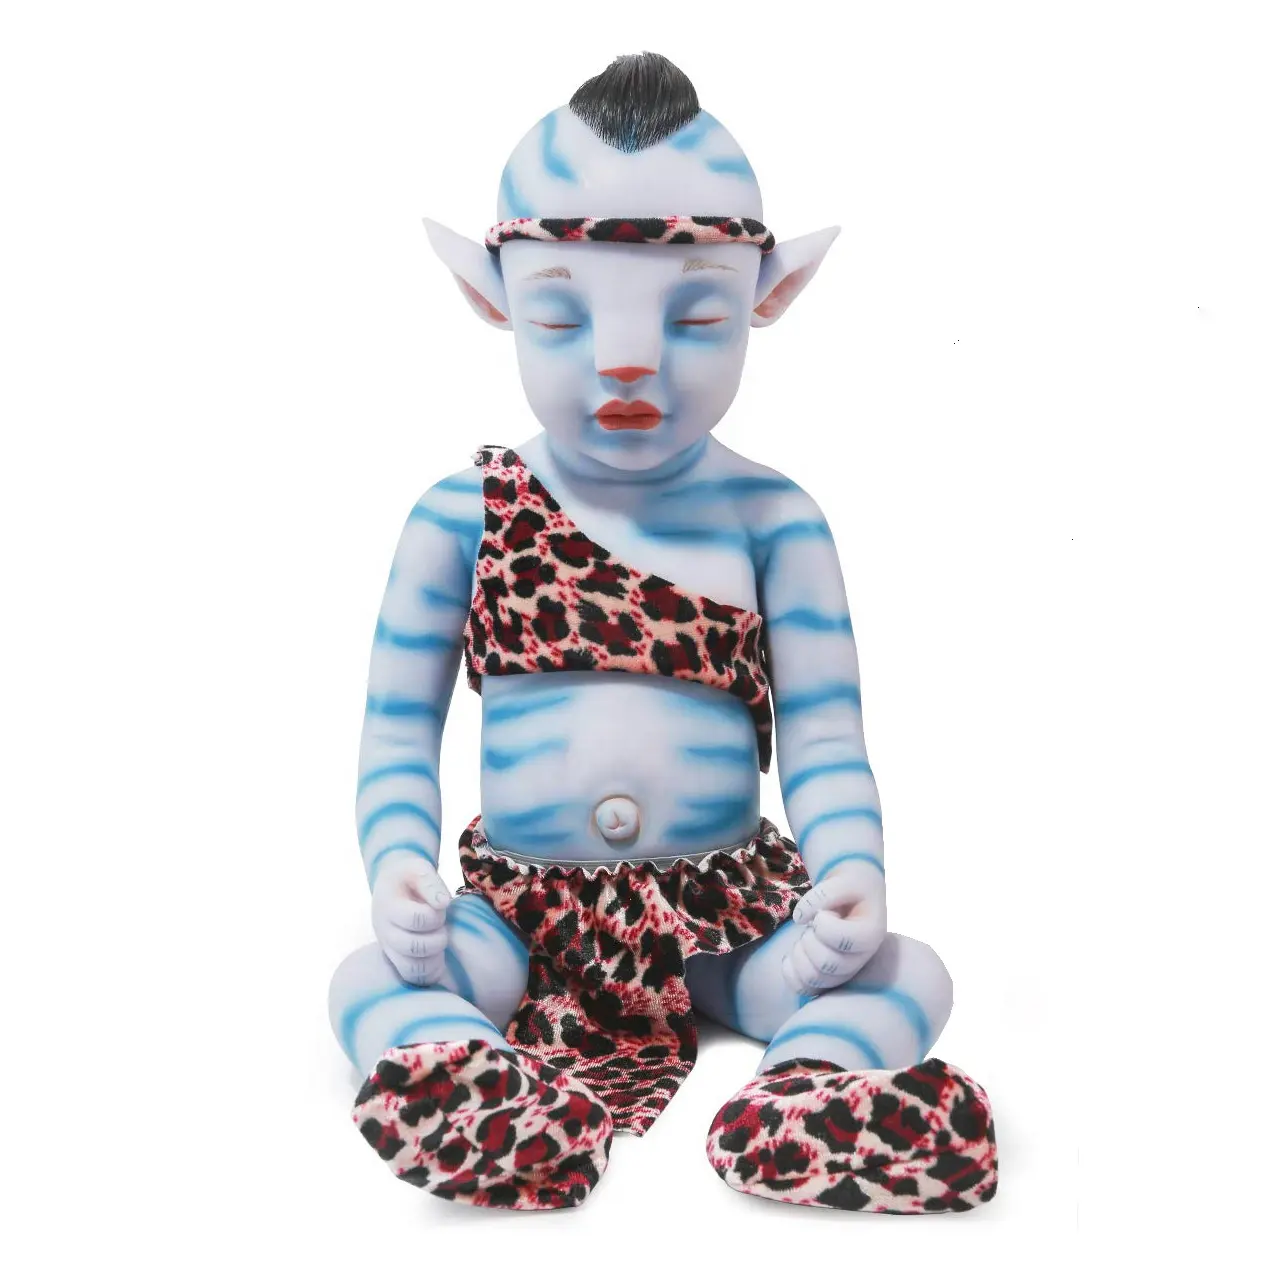 20 Inch Realistic Reborn Avatar Baby Soft Silicone Doll Special Gift for Kids